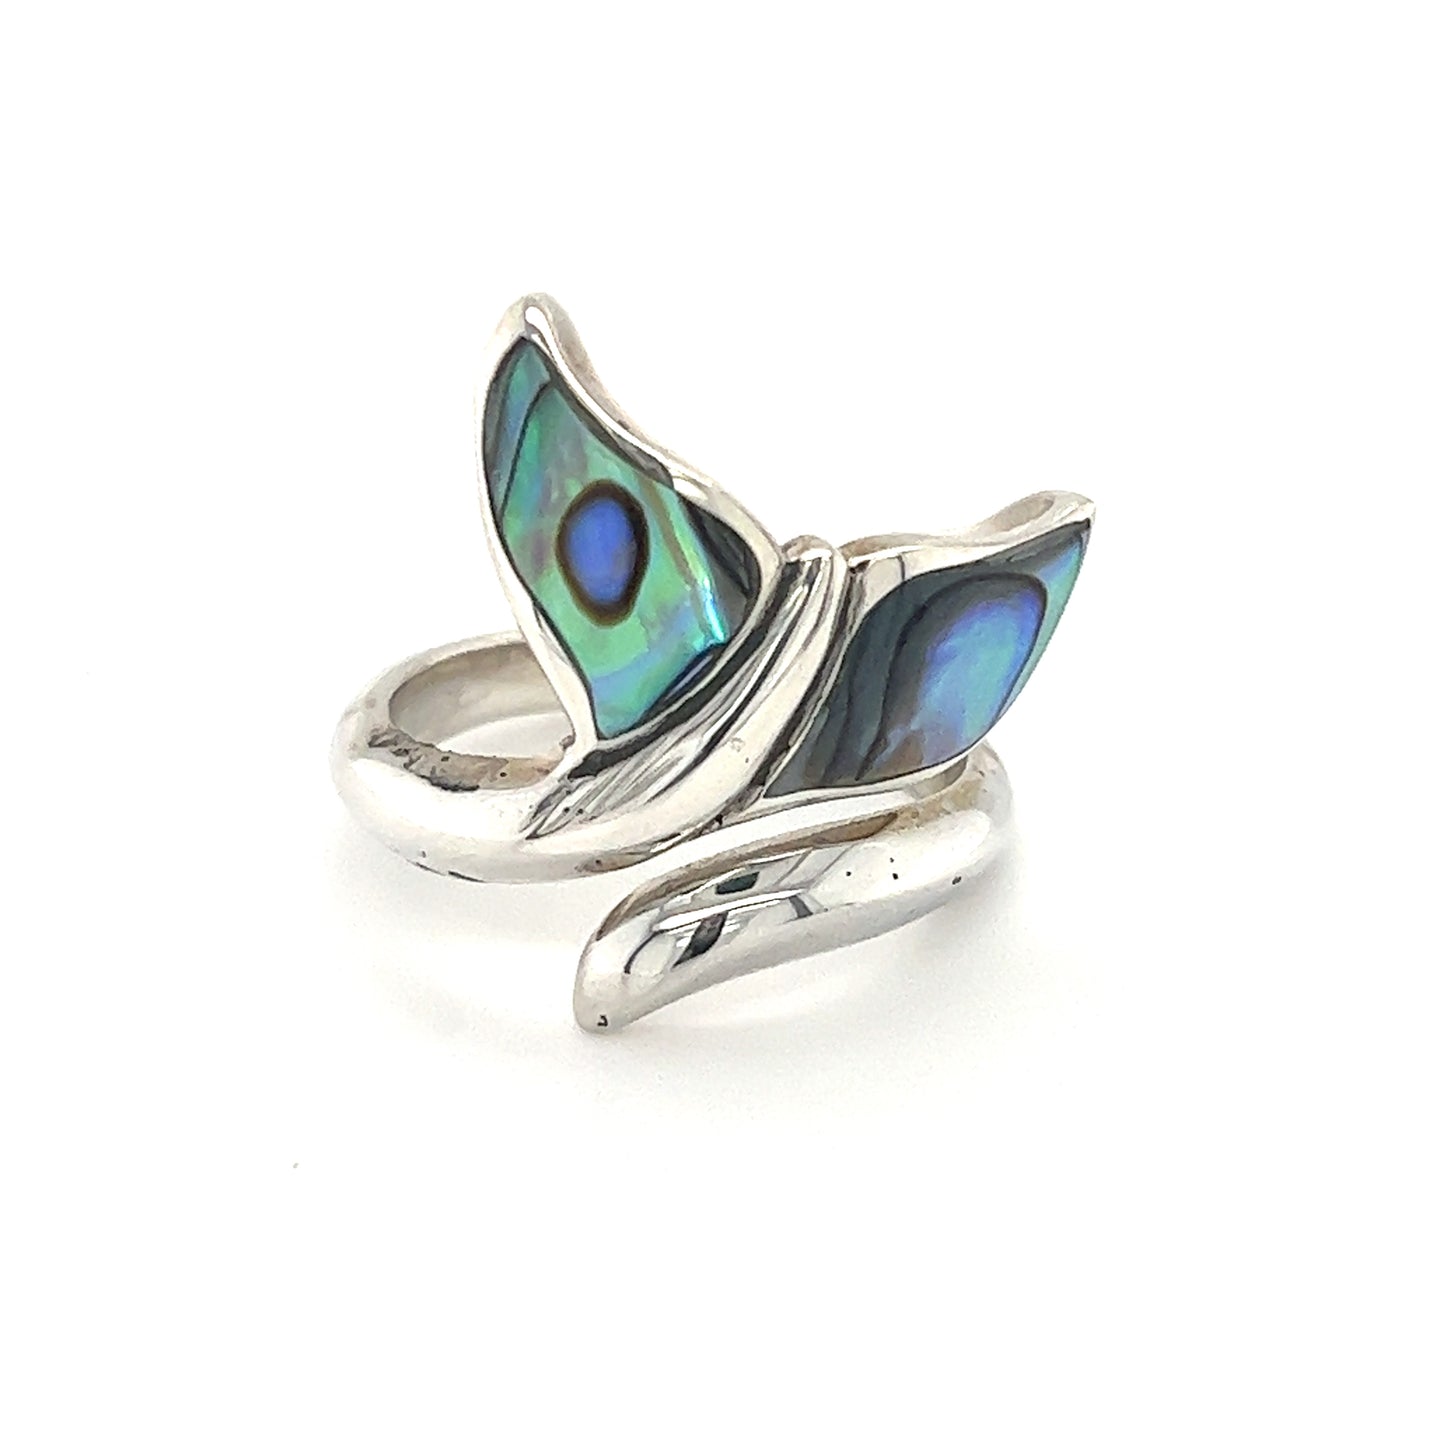 A Refreshing Adjustable Abalone Whale Tail Ring elegantly adorning it, reminiscent of the ocean breeze in Santa Cruz.